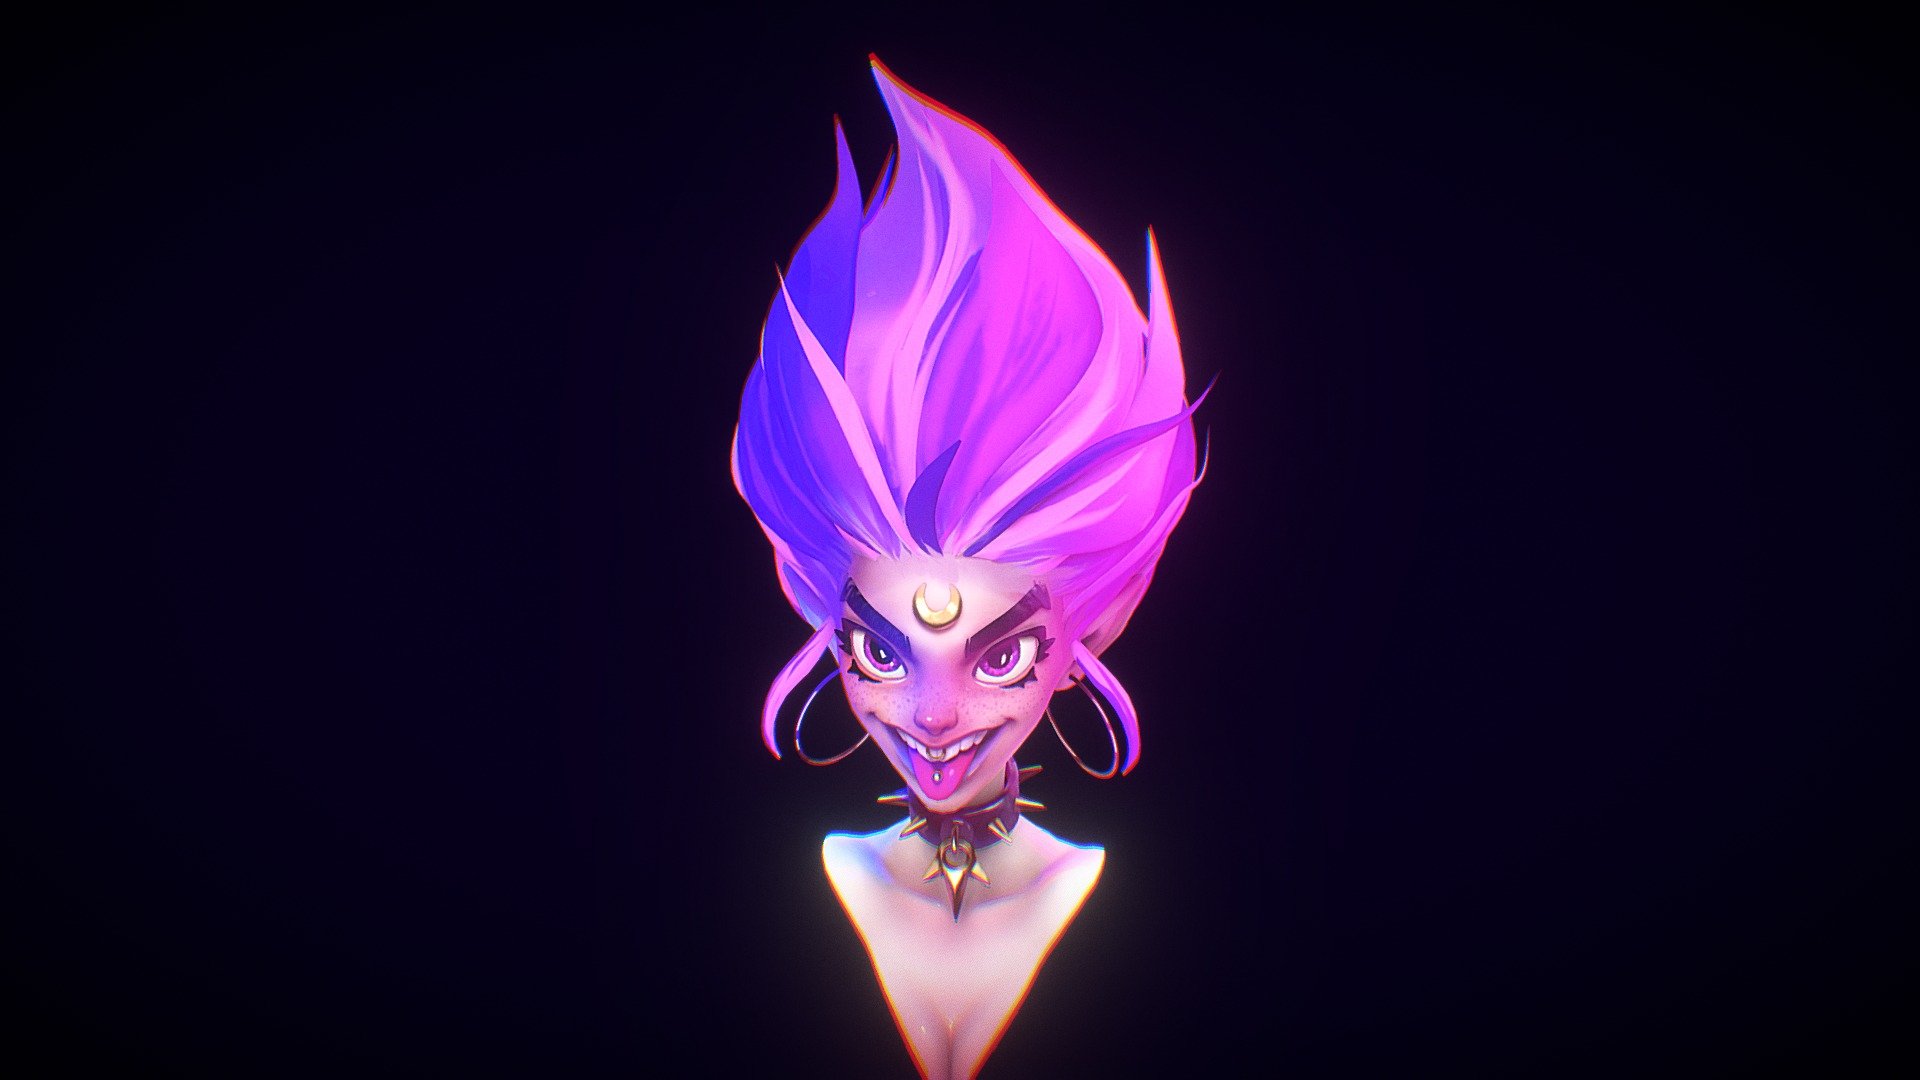 My texturing/handpainting exercise. I used ZBrush, Blender and Substance Painter.

Concept by Lucas Peinador https://www.youtube.com/watch?v=i7MXxk5pZH0 - Neon Pixie - Buy Royalty Free 3D model by Truneps 3d model